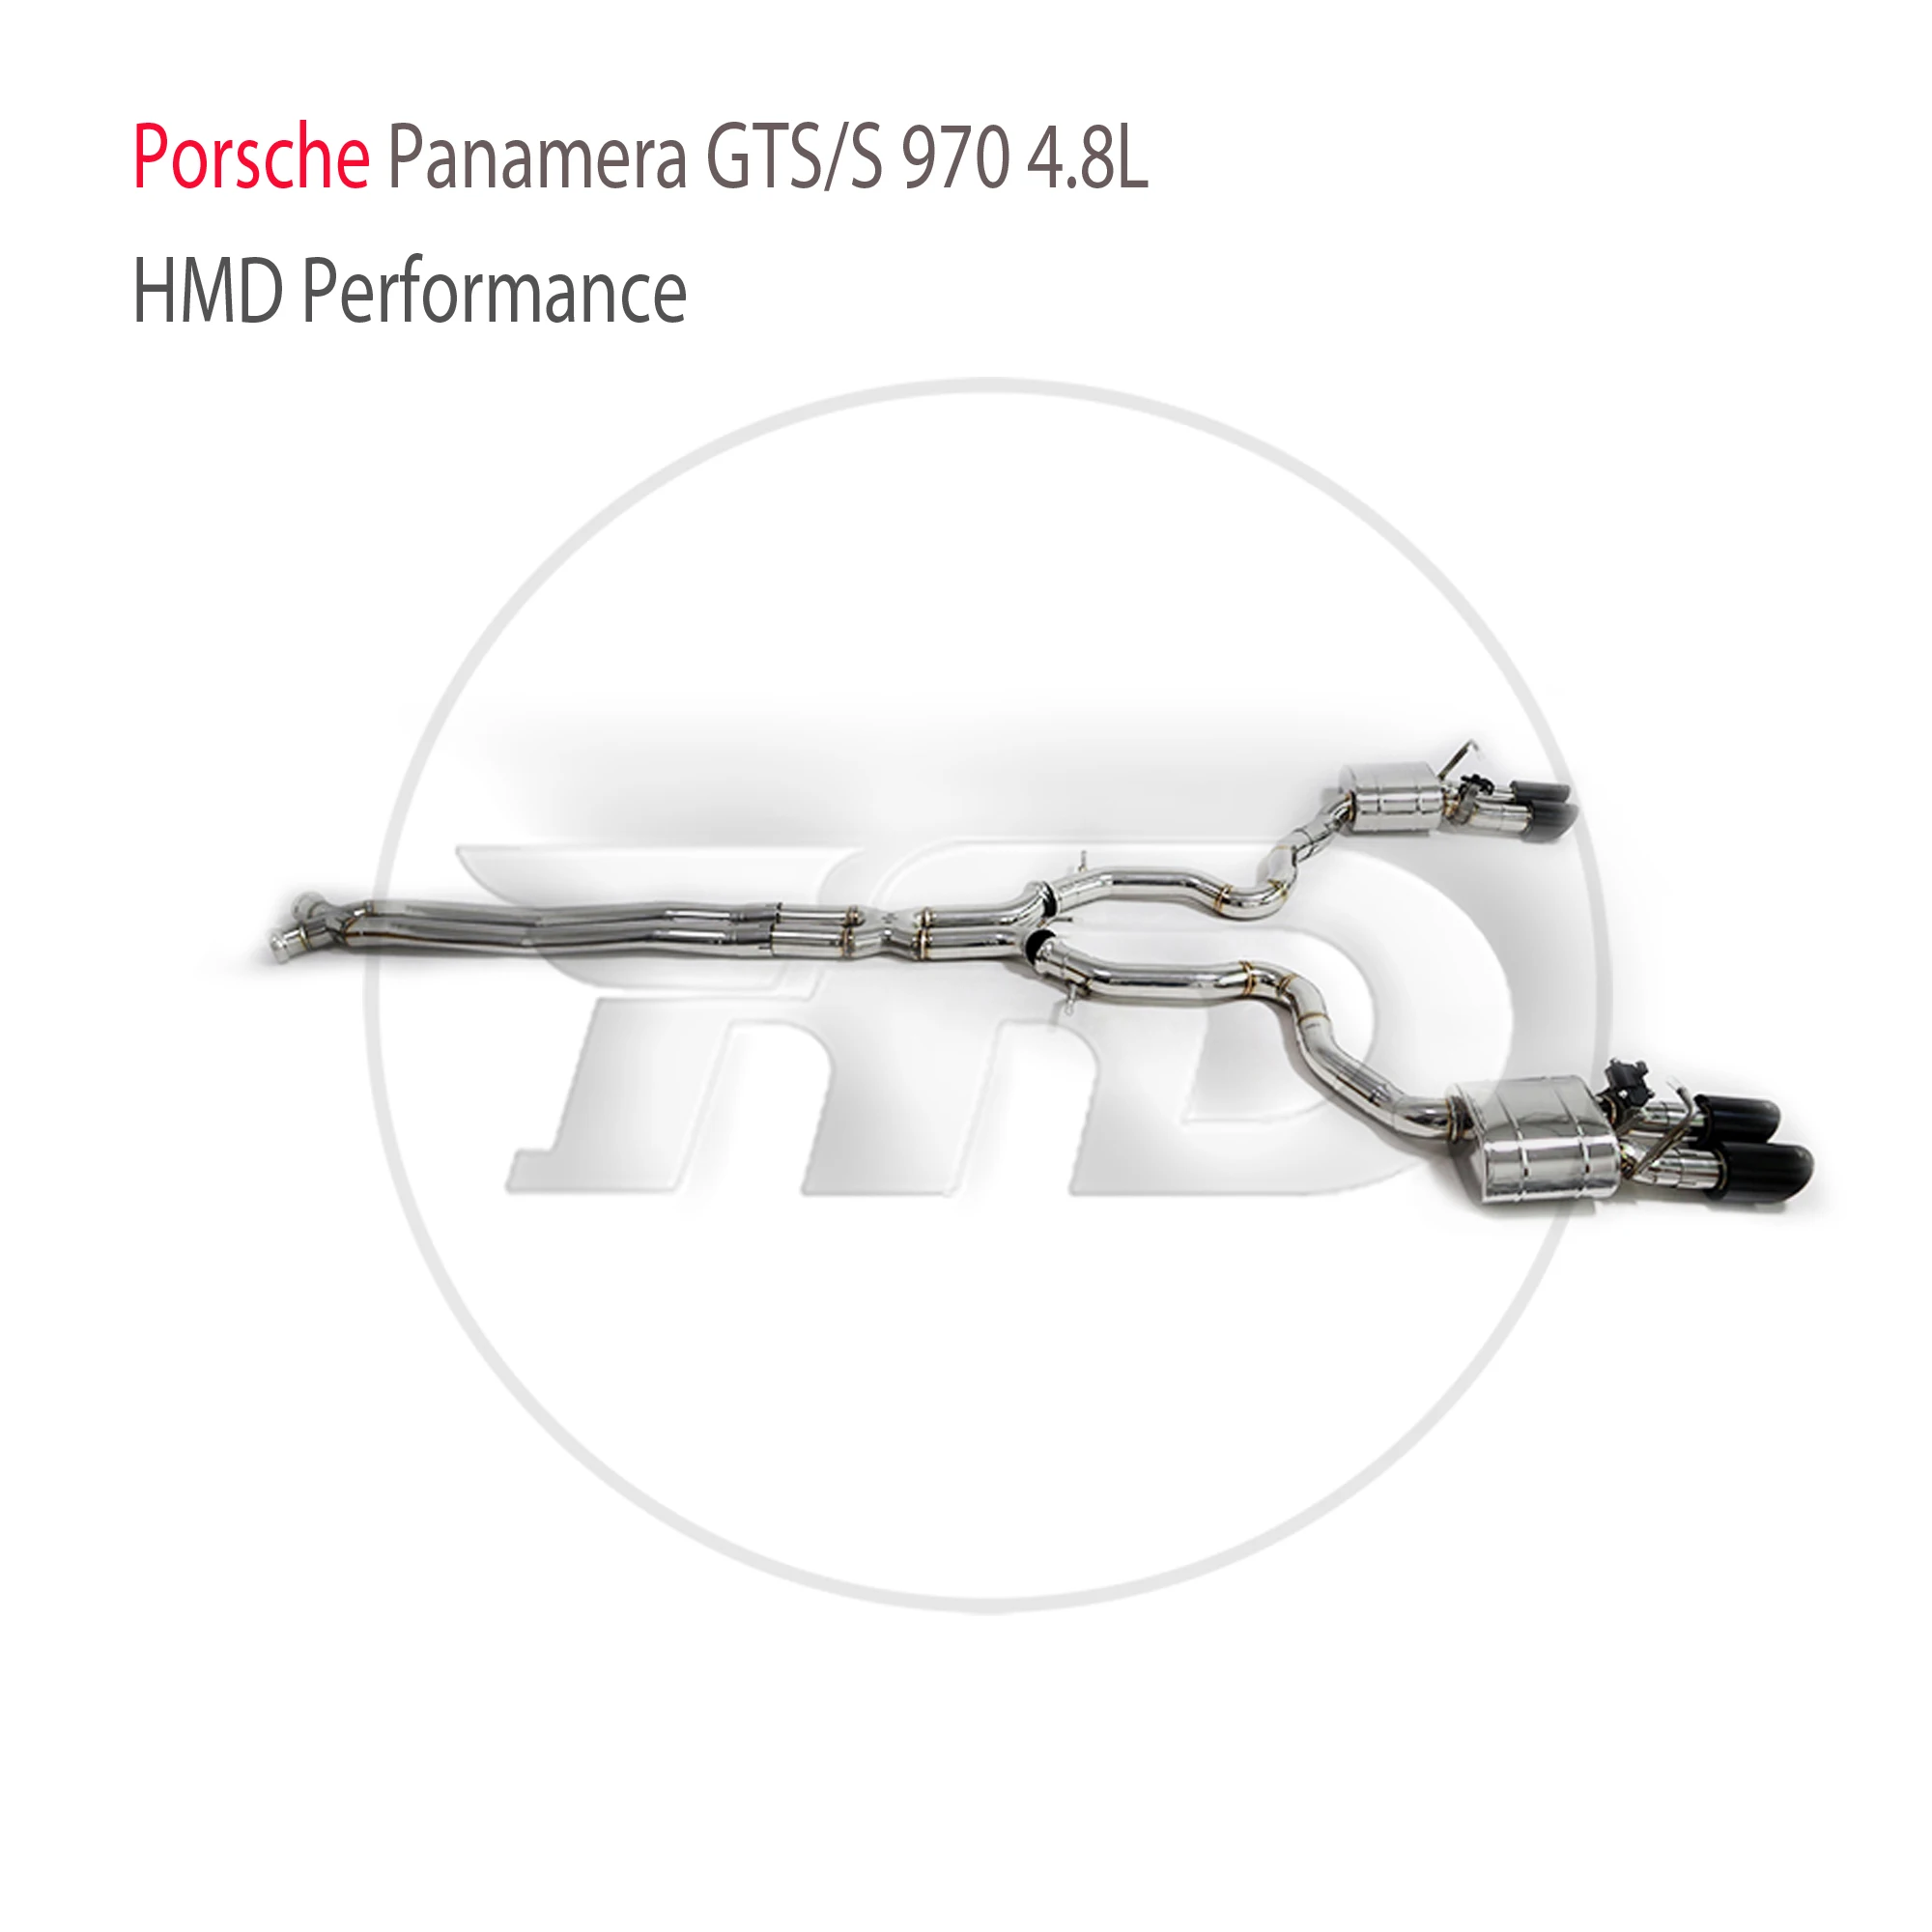 

HMD Stainless Steel Exhaust System Performance Catback For Porsche Panamera GTS S 970 4.8L Car Electronic Valve Muffler